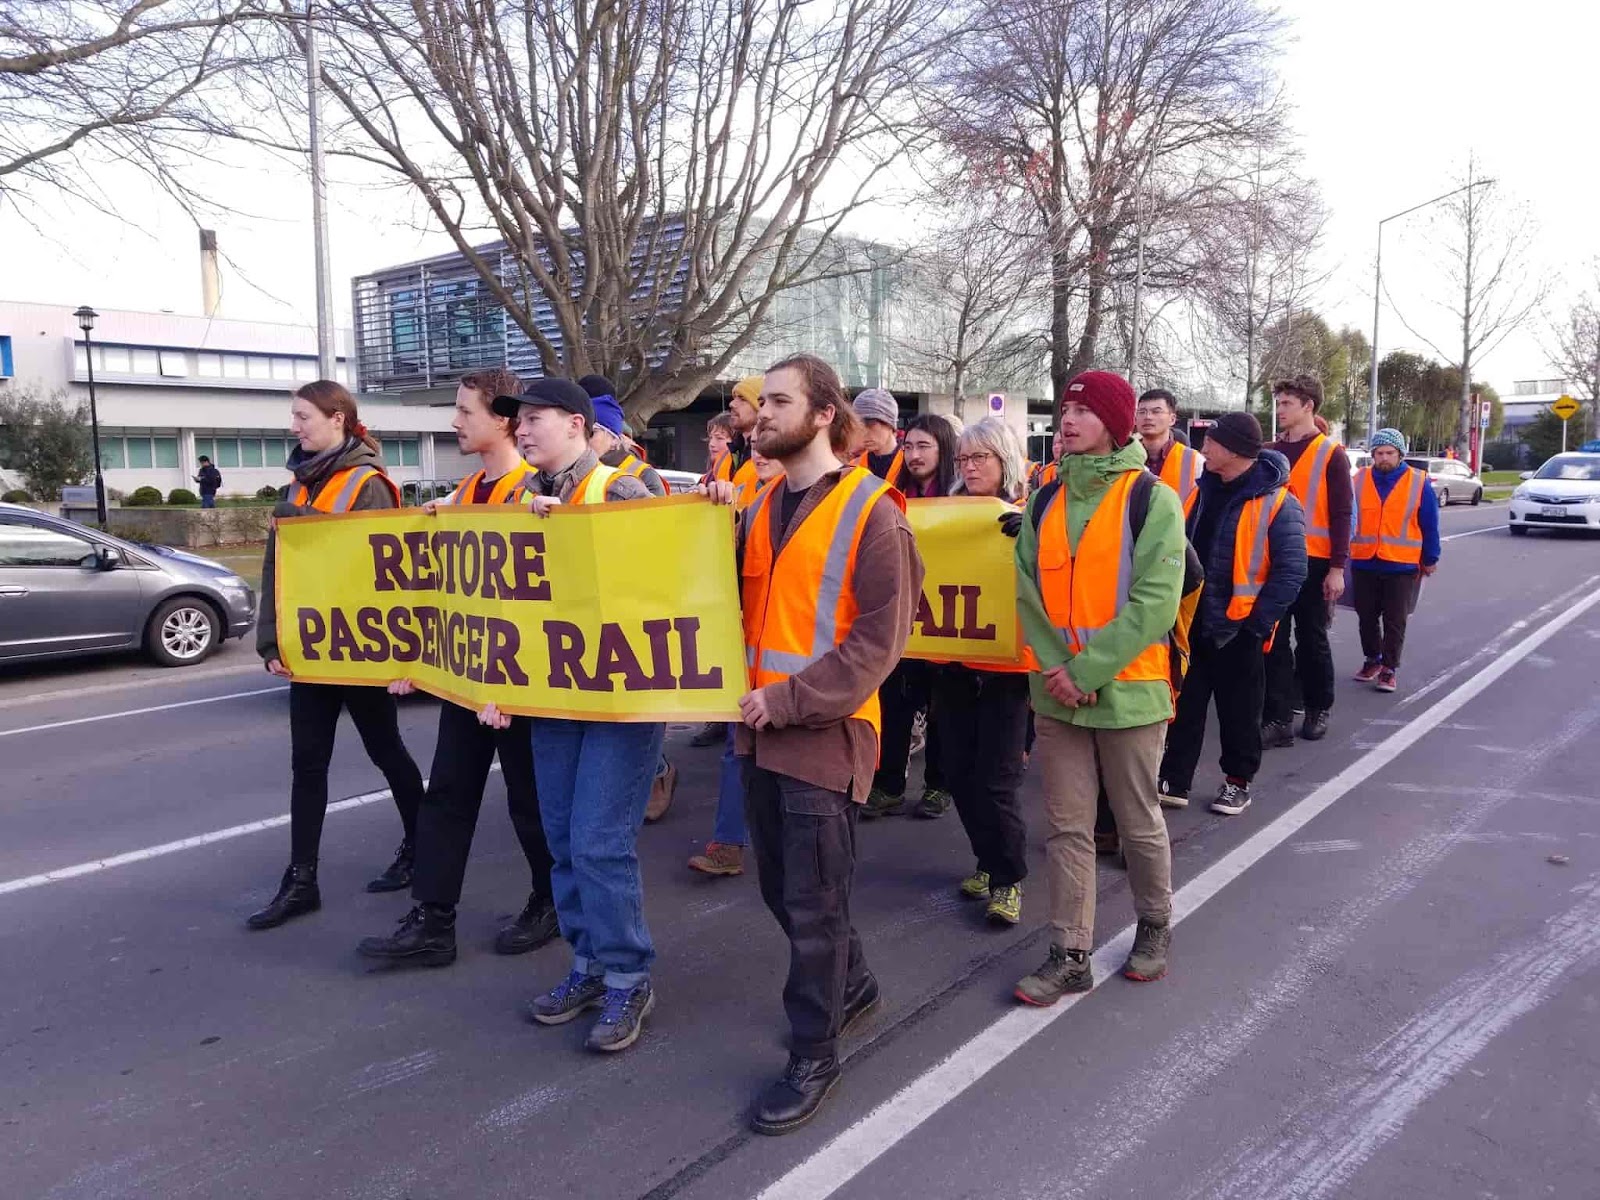 Activists slow march down the street holding Restore Passenger Rail banners